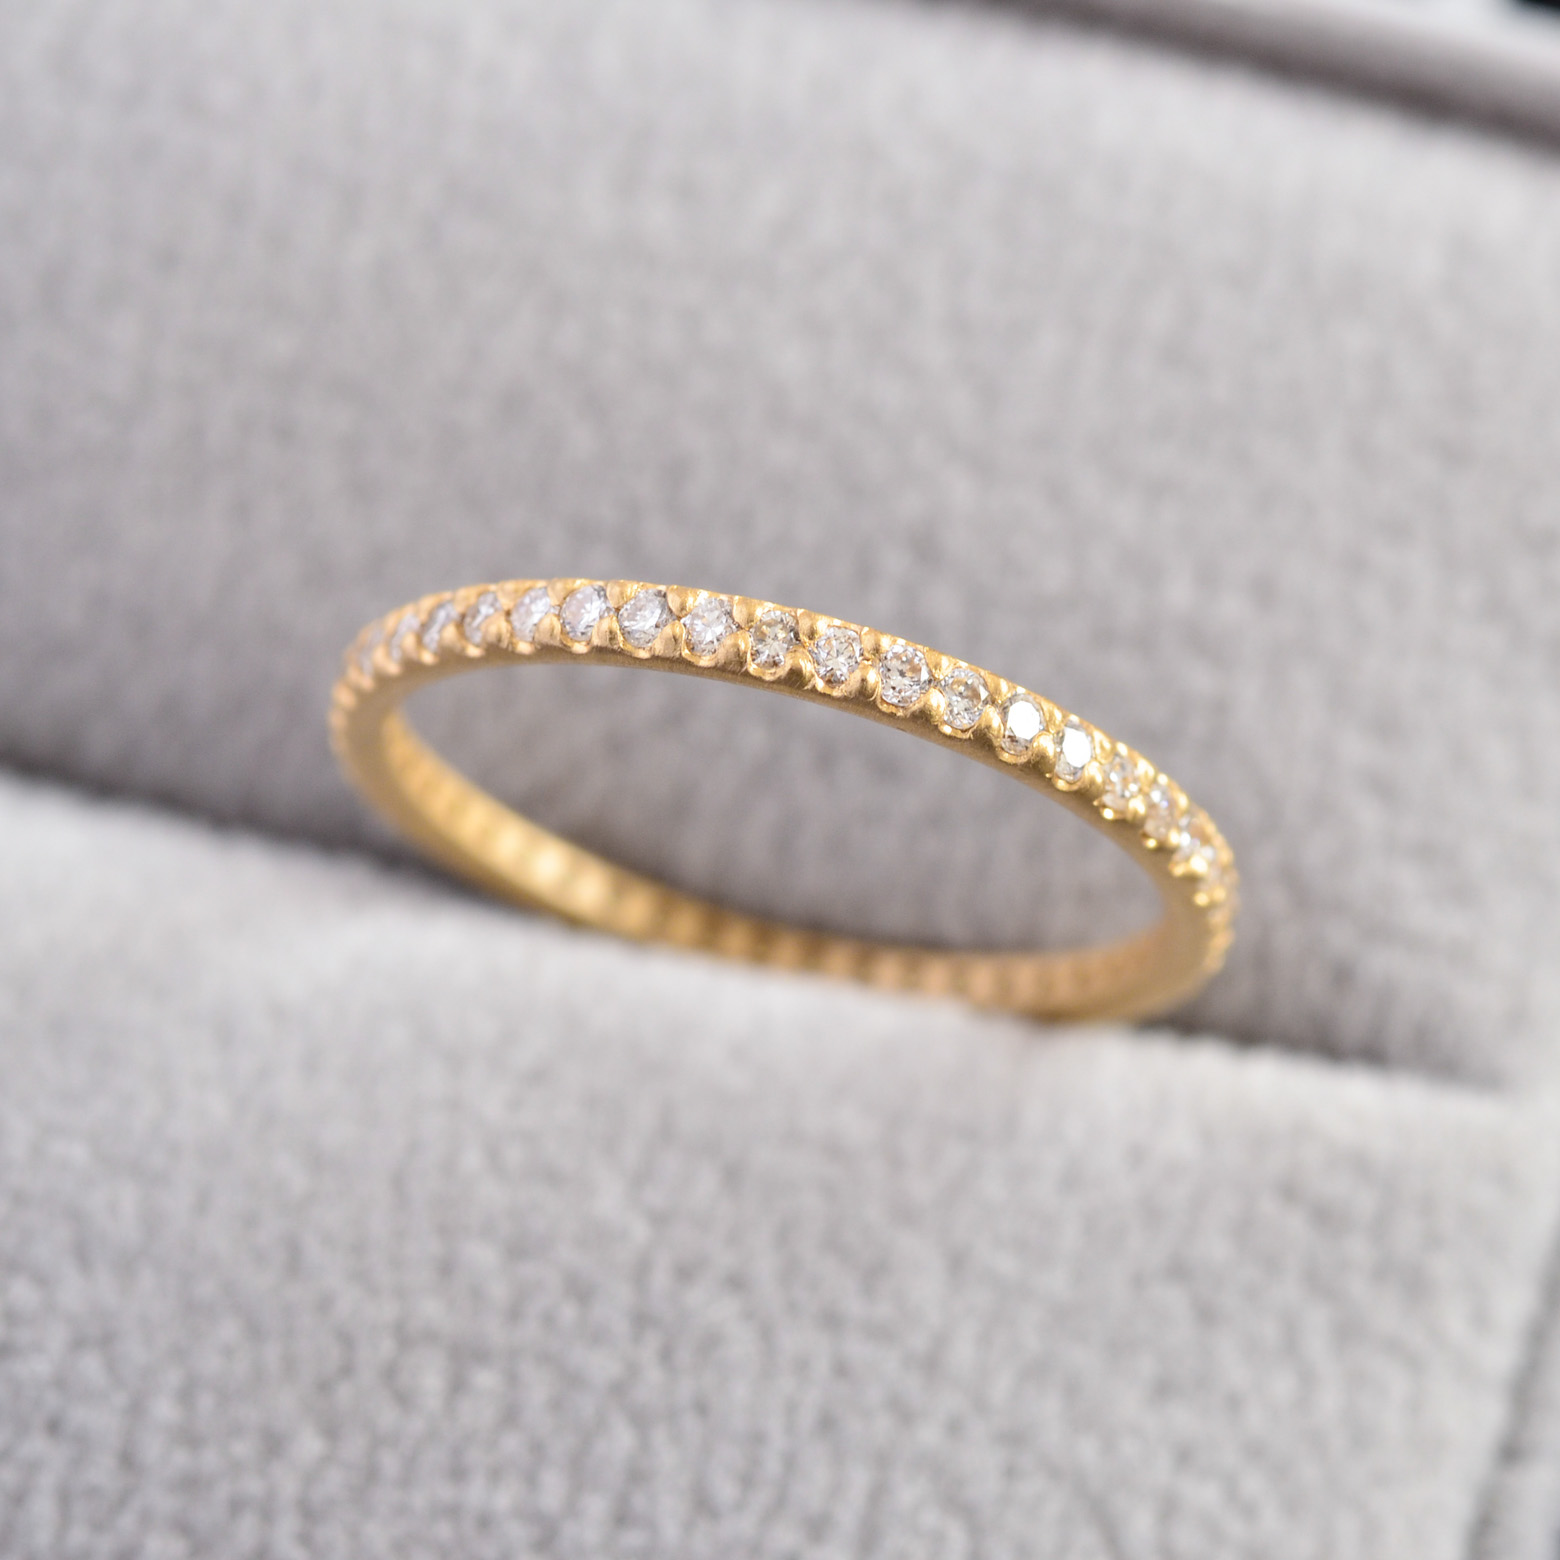 Diamond Full Eternity Ring (SOURCE) - SOURCE objects